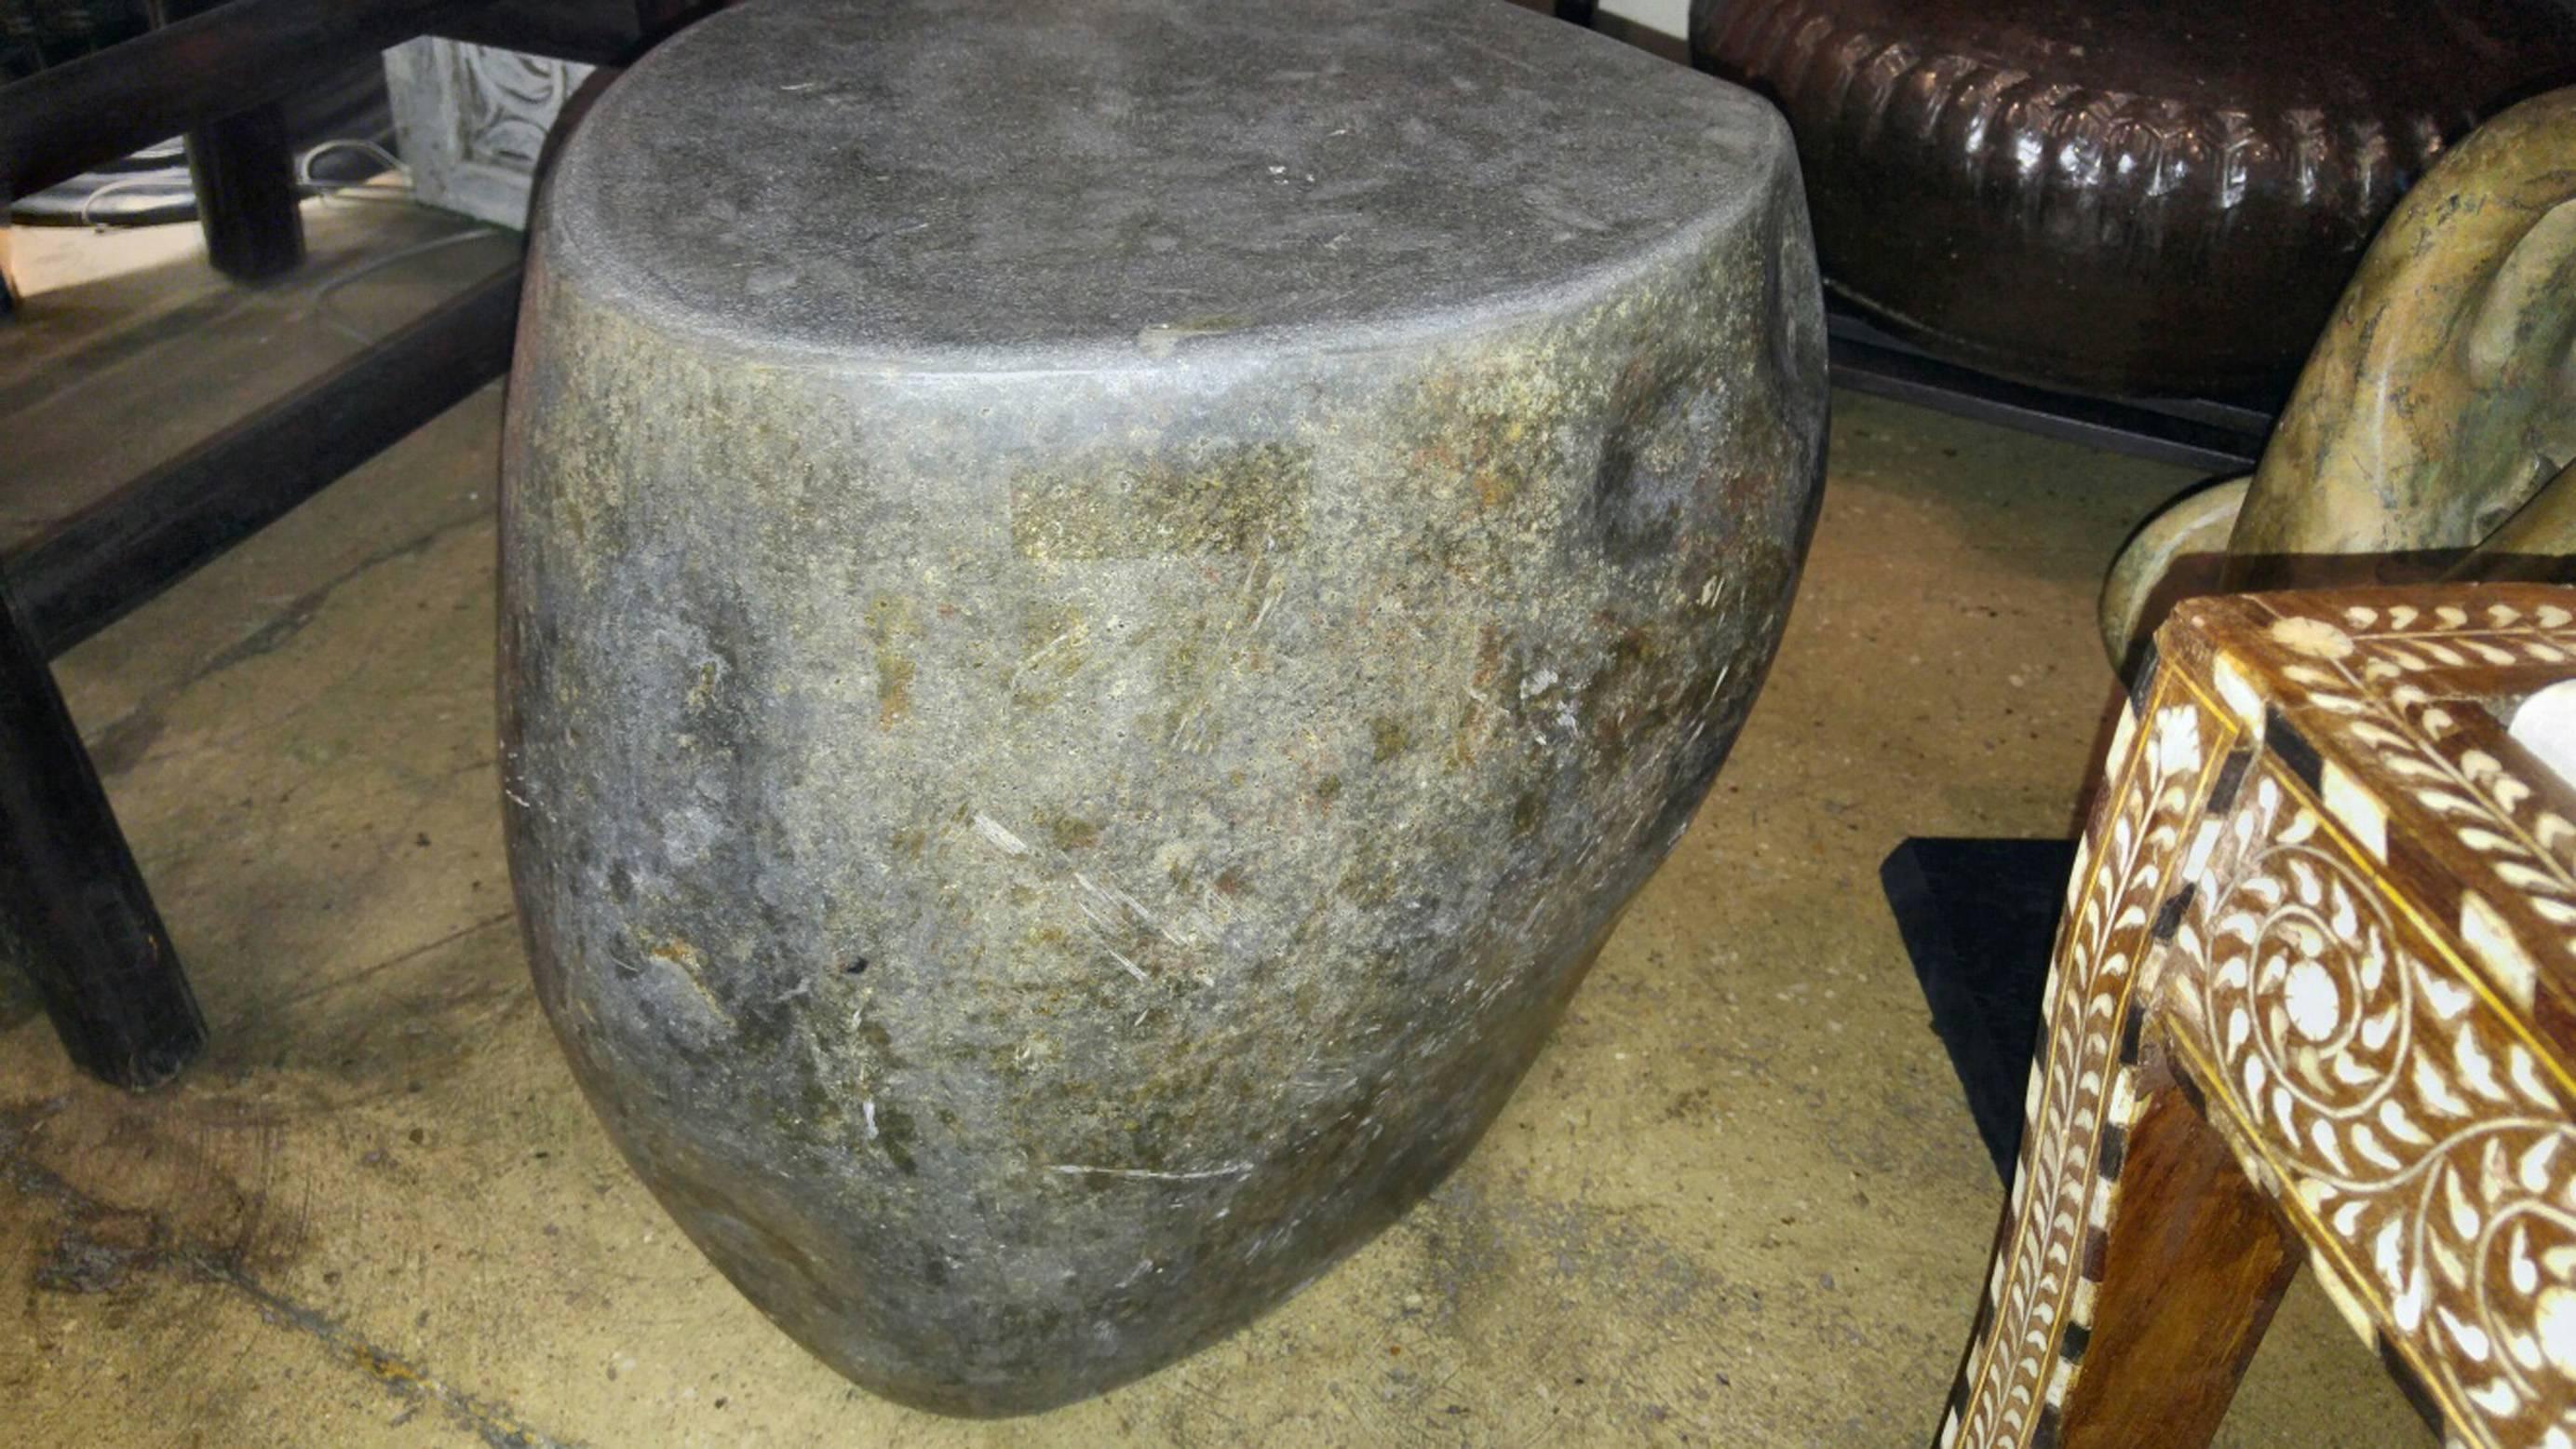 Indonesian Stone End Table